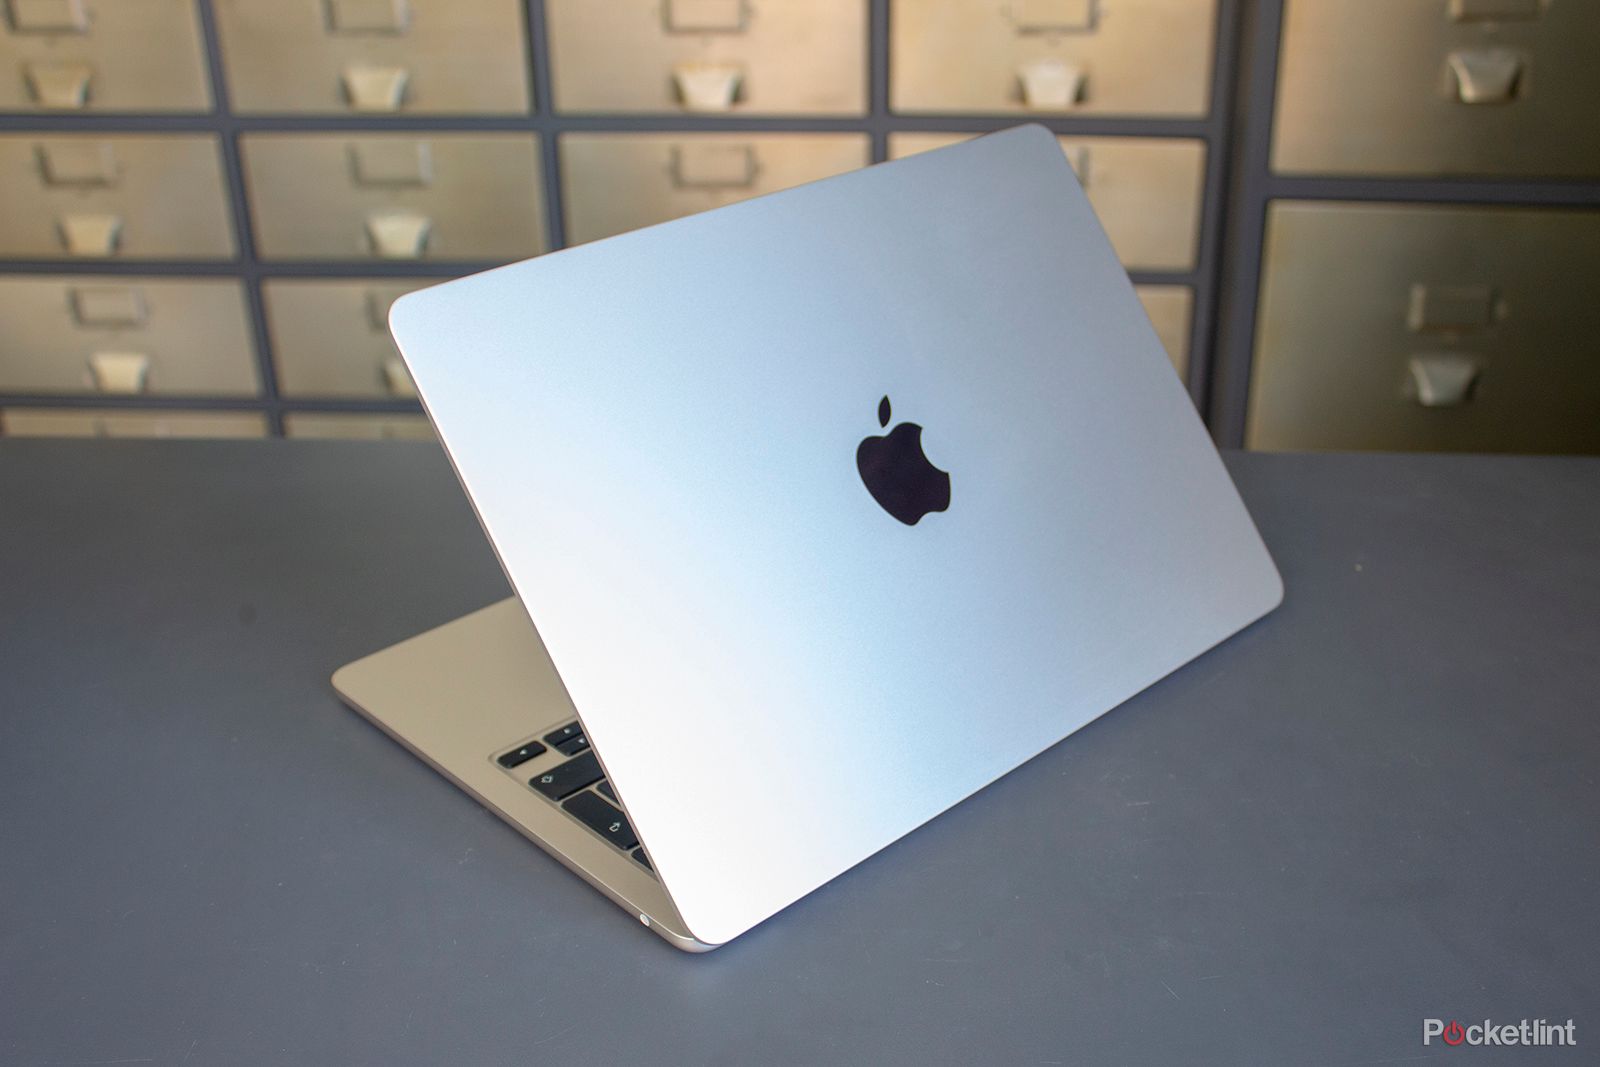 Save up to $250 on a MacBook Air and be back to school ready